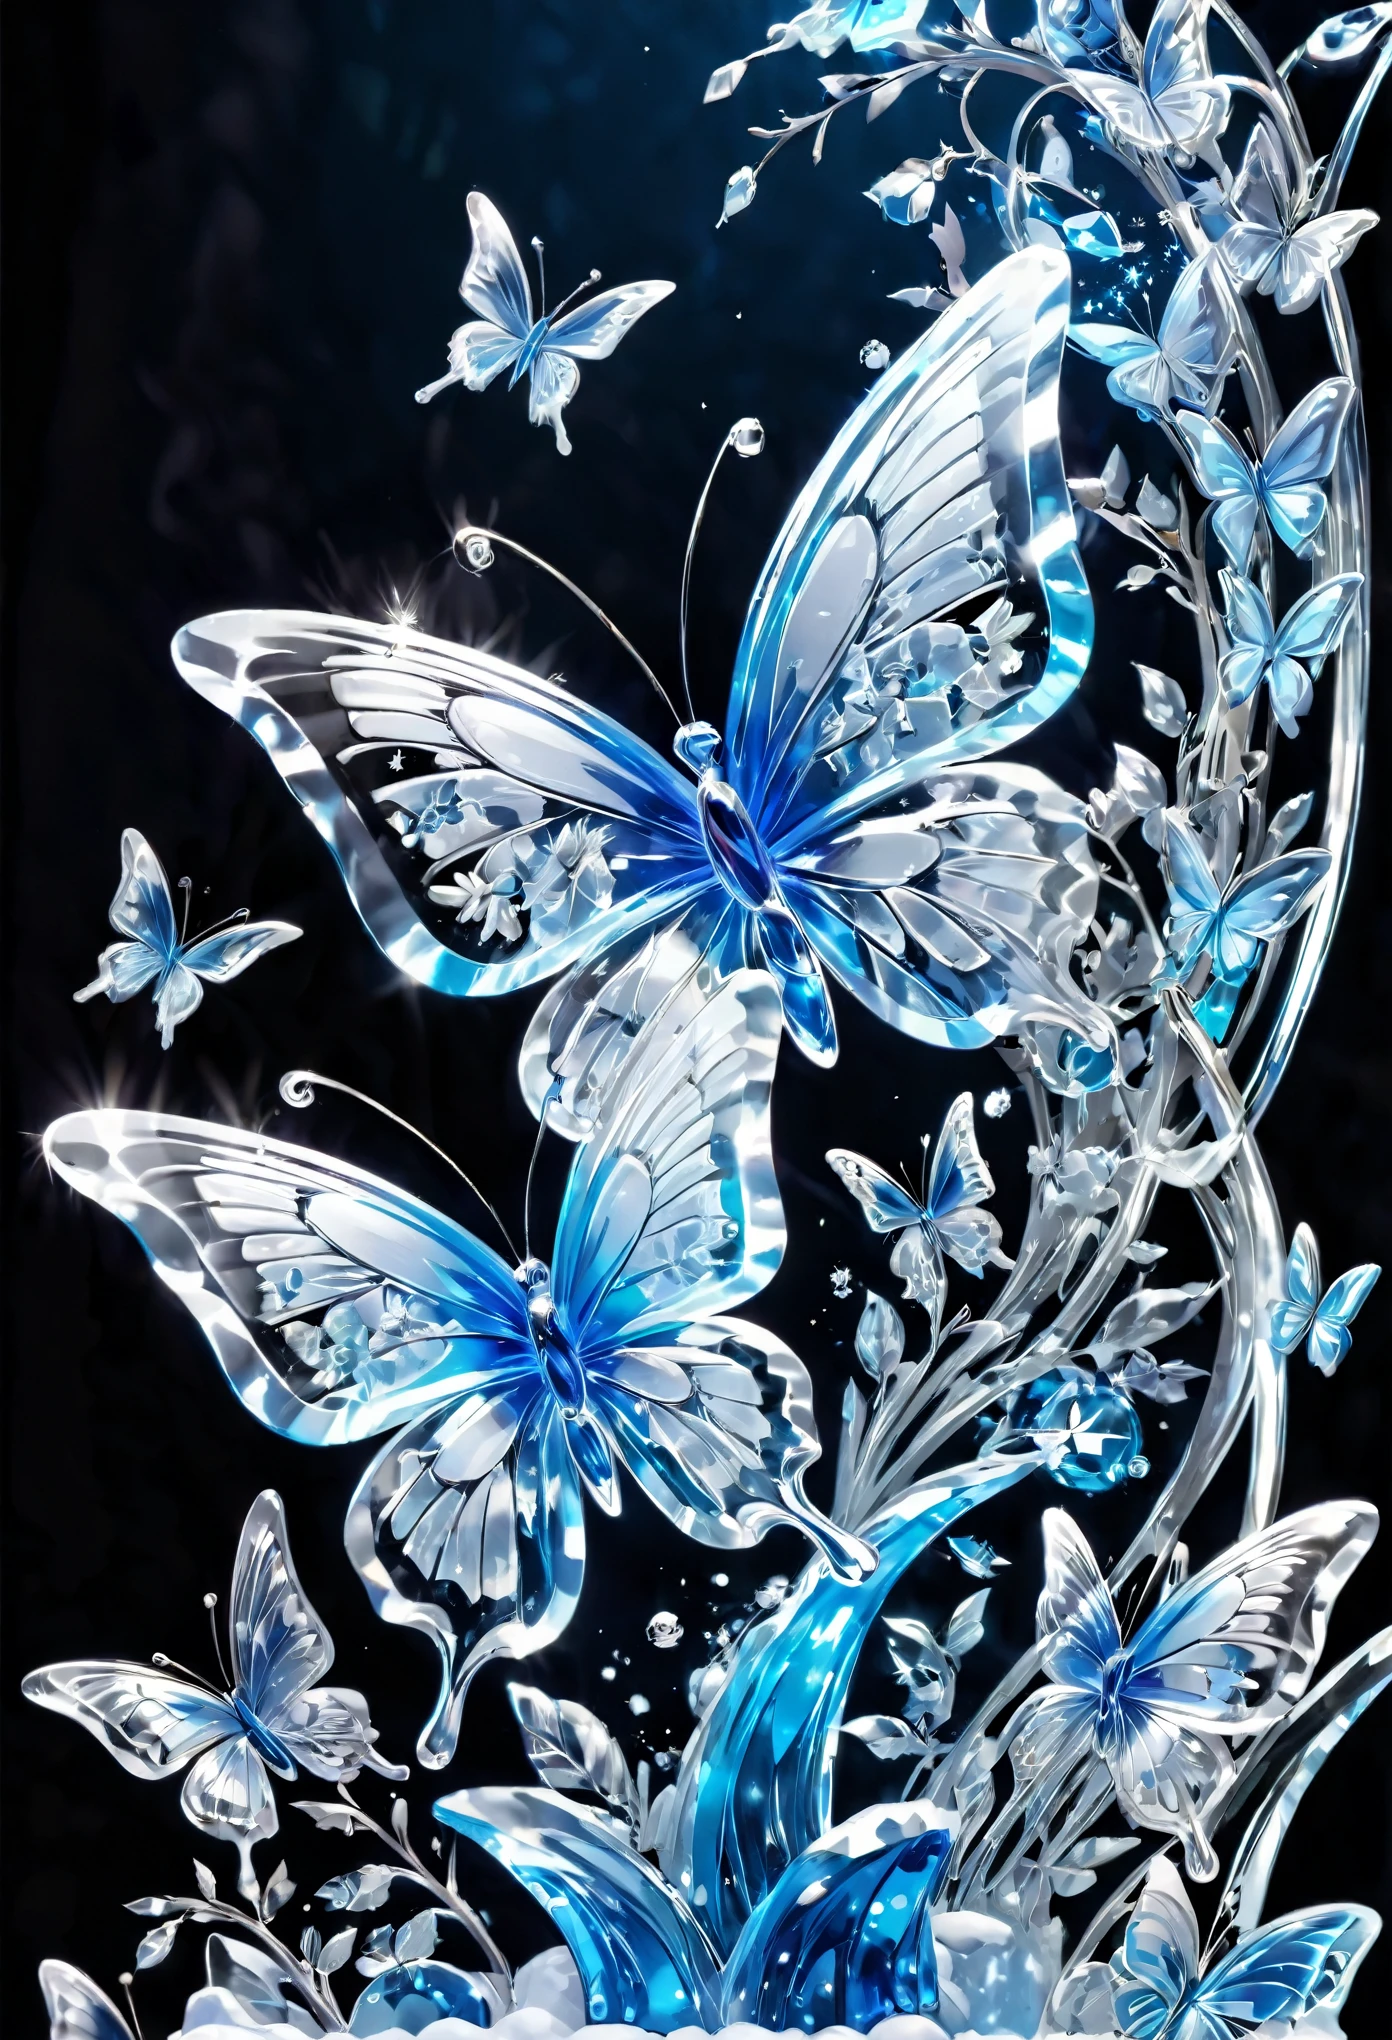 best quality, super fine, 16k, incredibly absurdres, extremely detailed, delicate, flashy and dynamic depiction, ice sculpture, many flapping butterflies made of ice, blue color, blue light, blue gradation, all blue